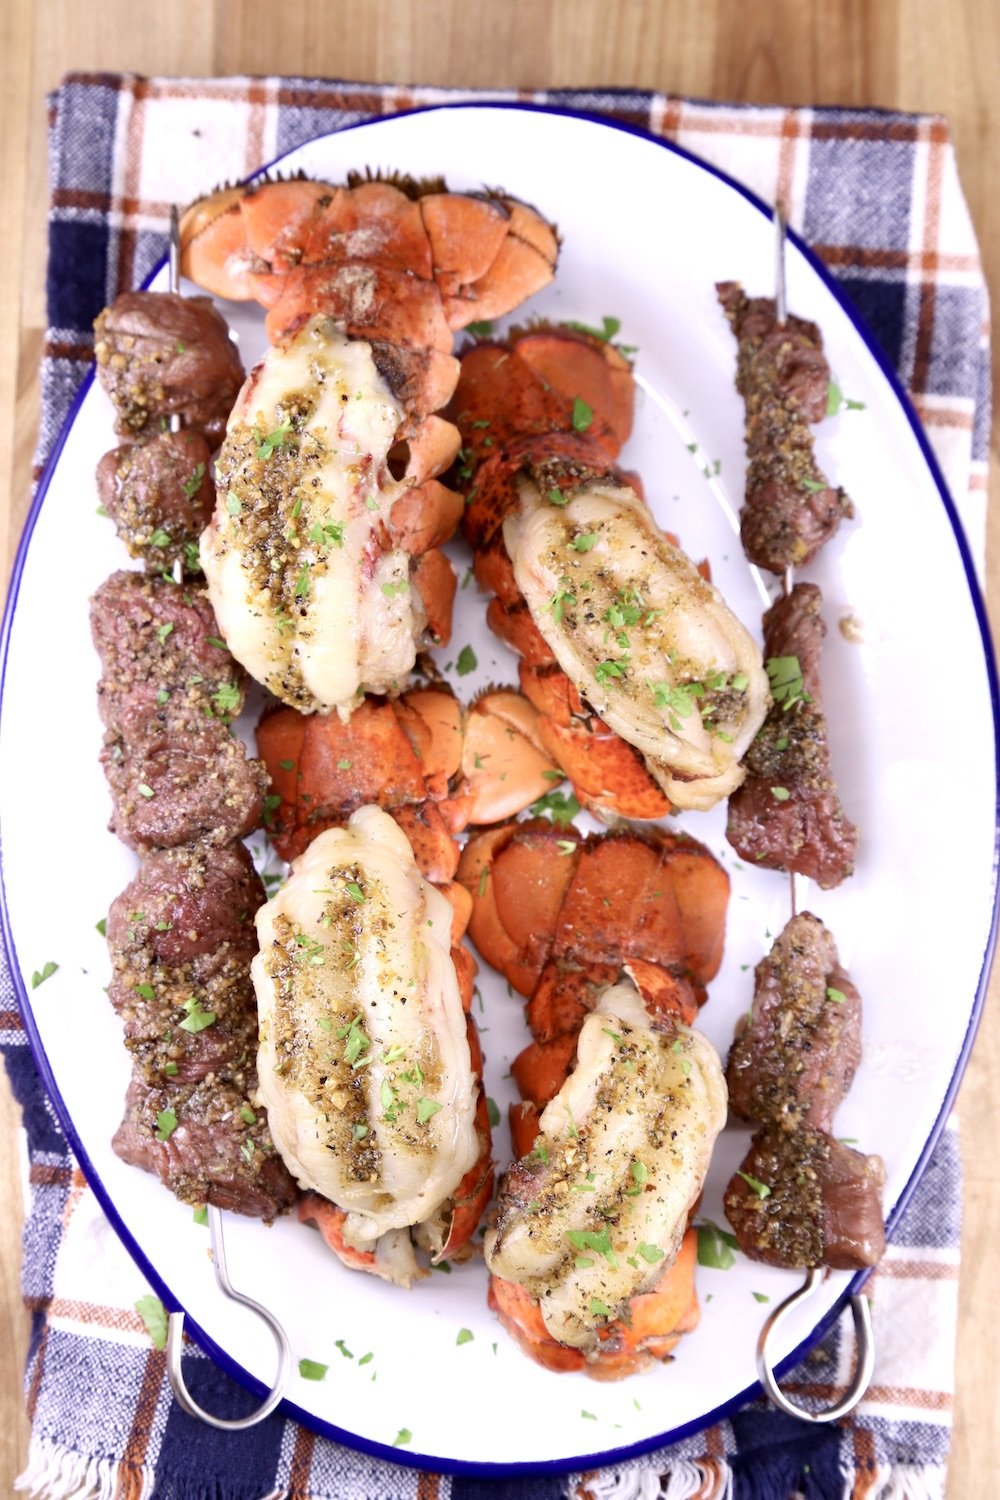 Plaid napkin with oval platter of grilled garlic butter lobster and steak bites